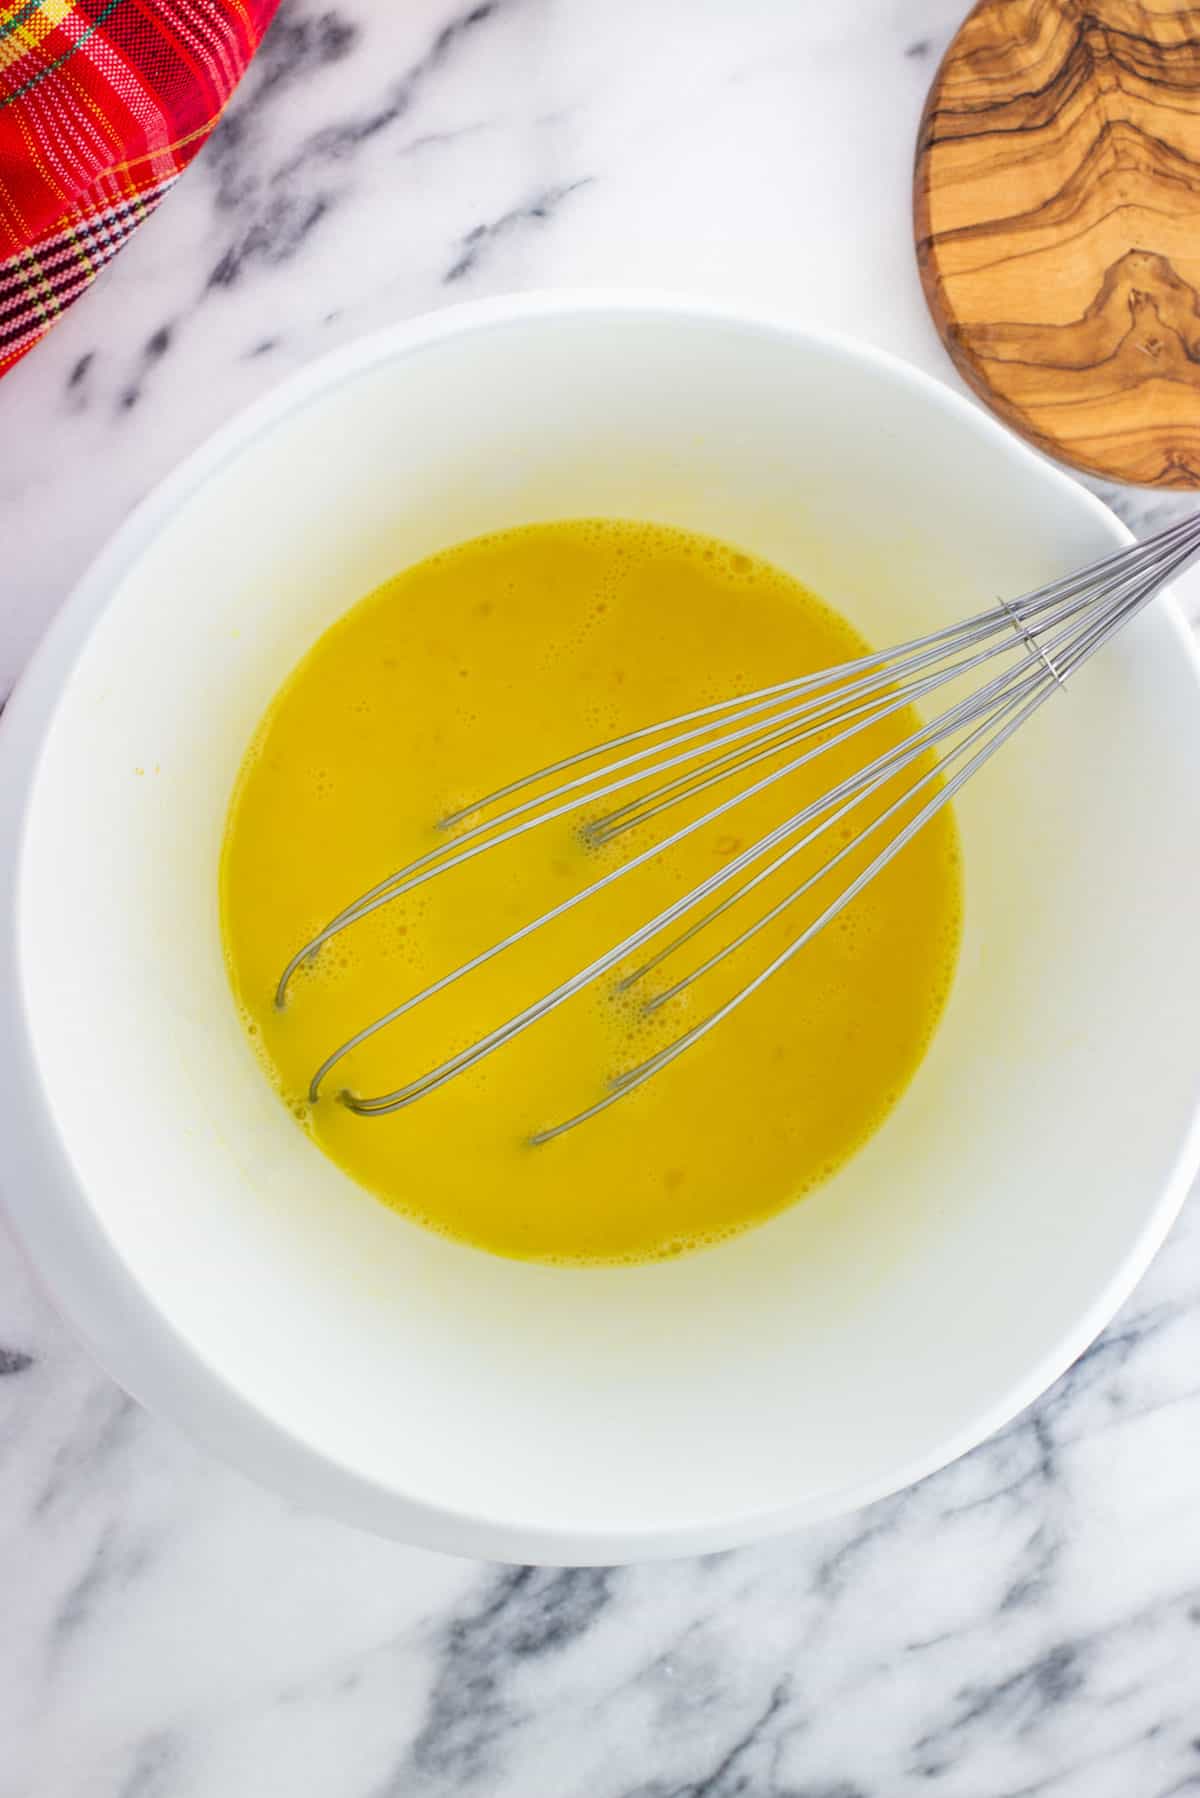 Eggs whisked together in a mixing bowl to start the custard.